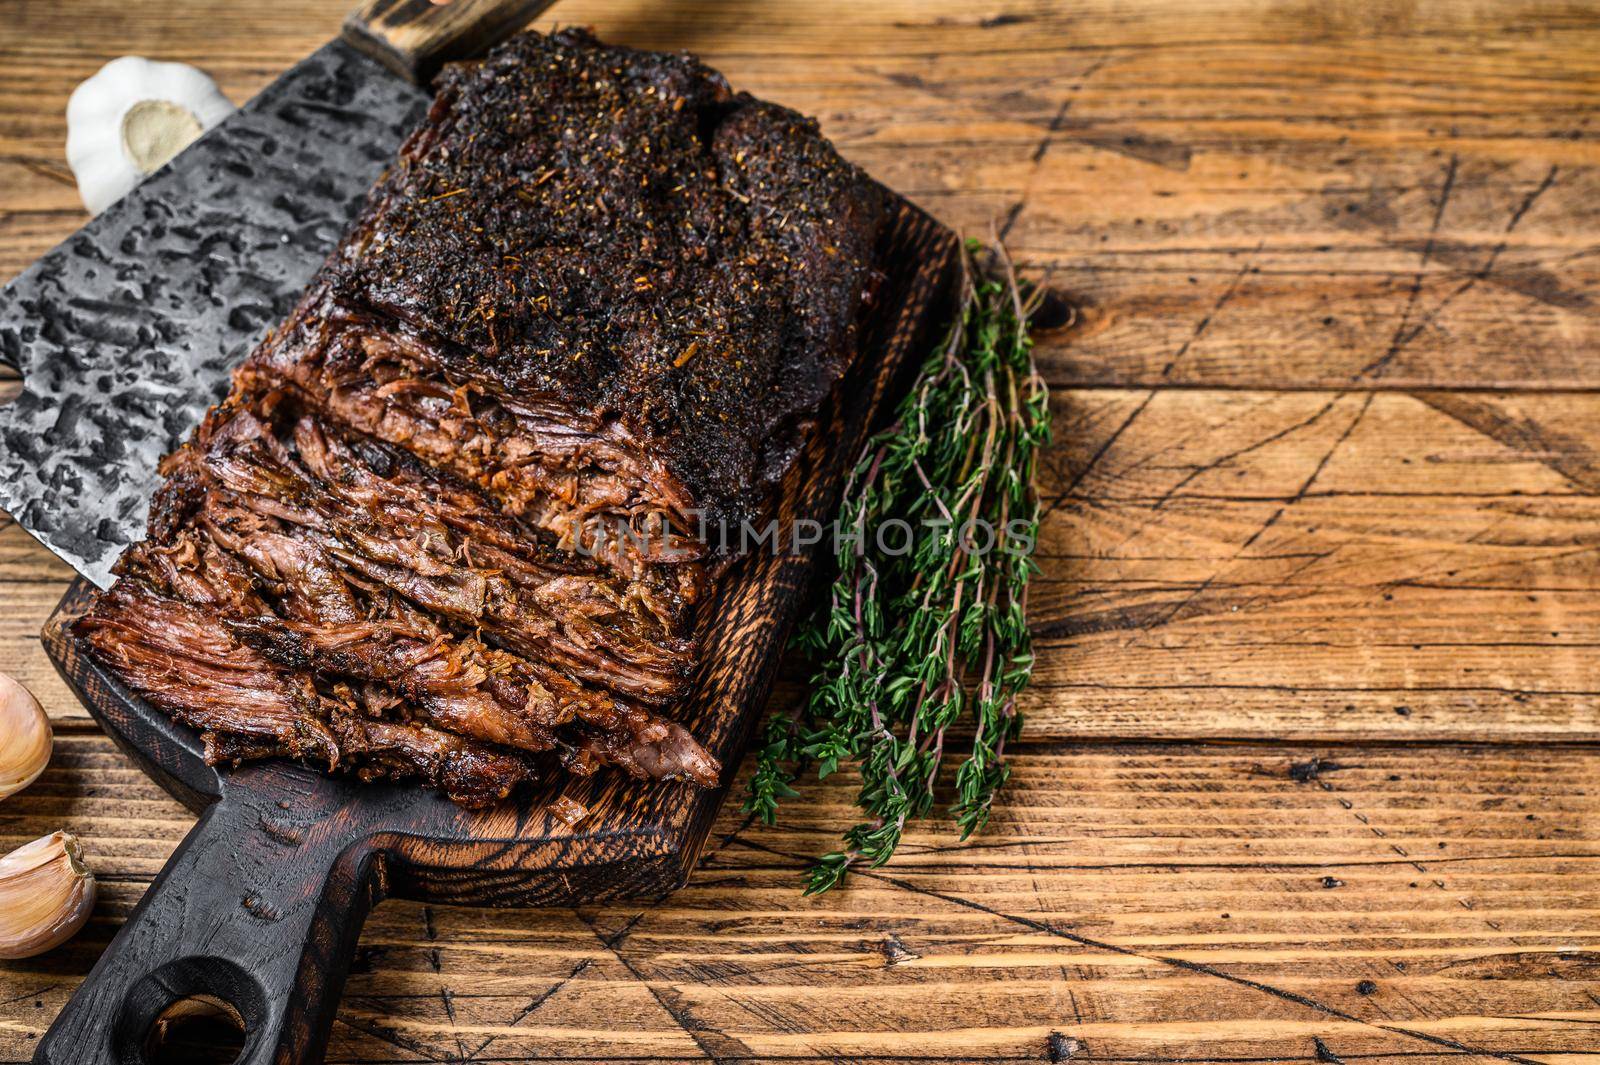 Homemade Smoked Barbecue Beef Brisket meat. wooden background. Top view. Copy space by Composter